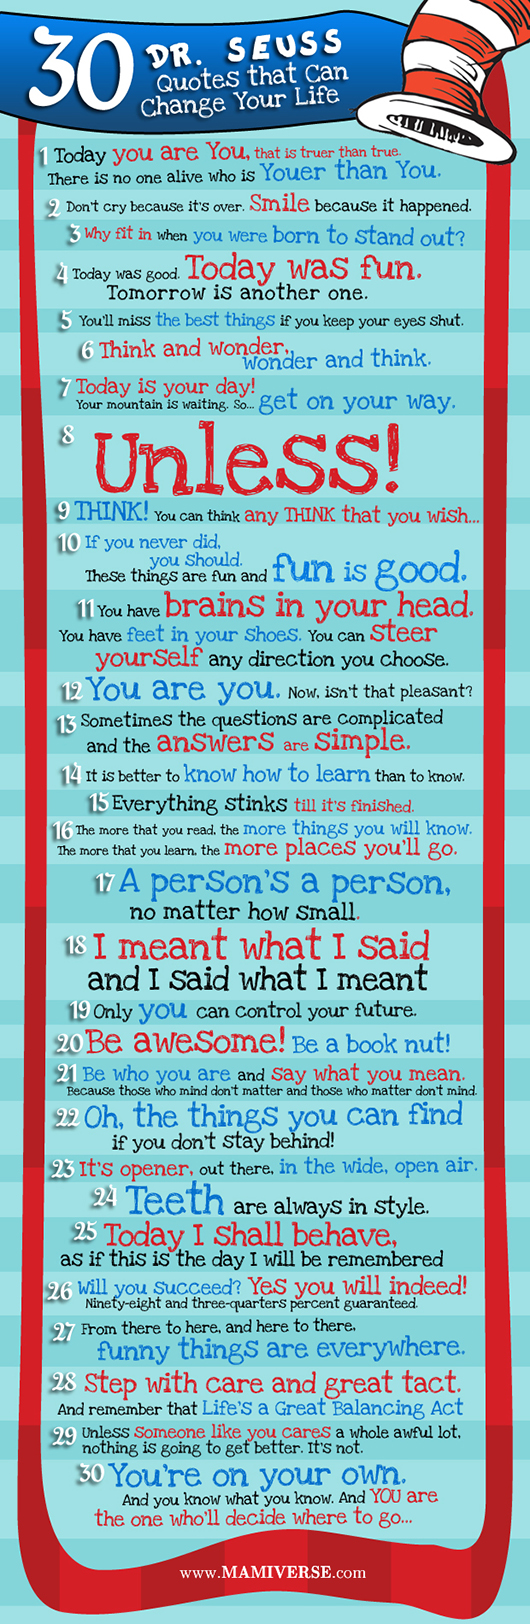 30 Dr Seuss Quotes That Can Change Your Life. #infographic